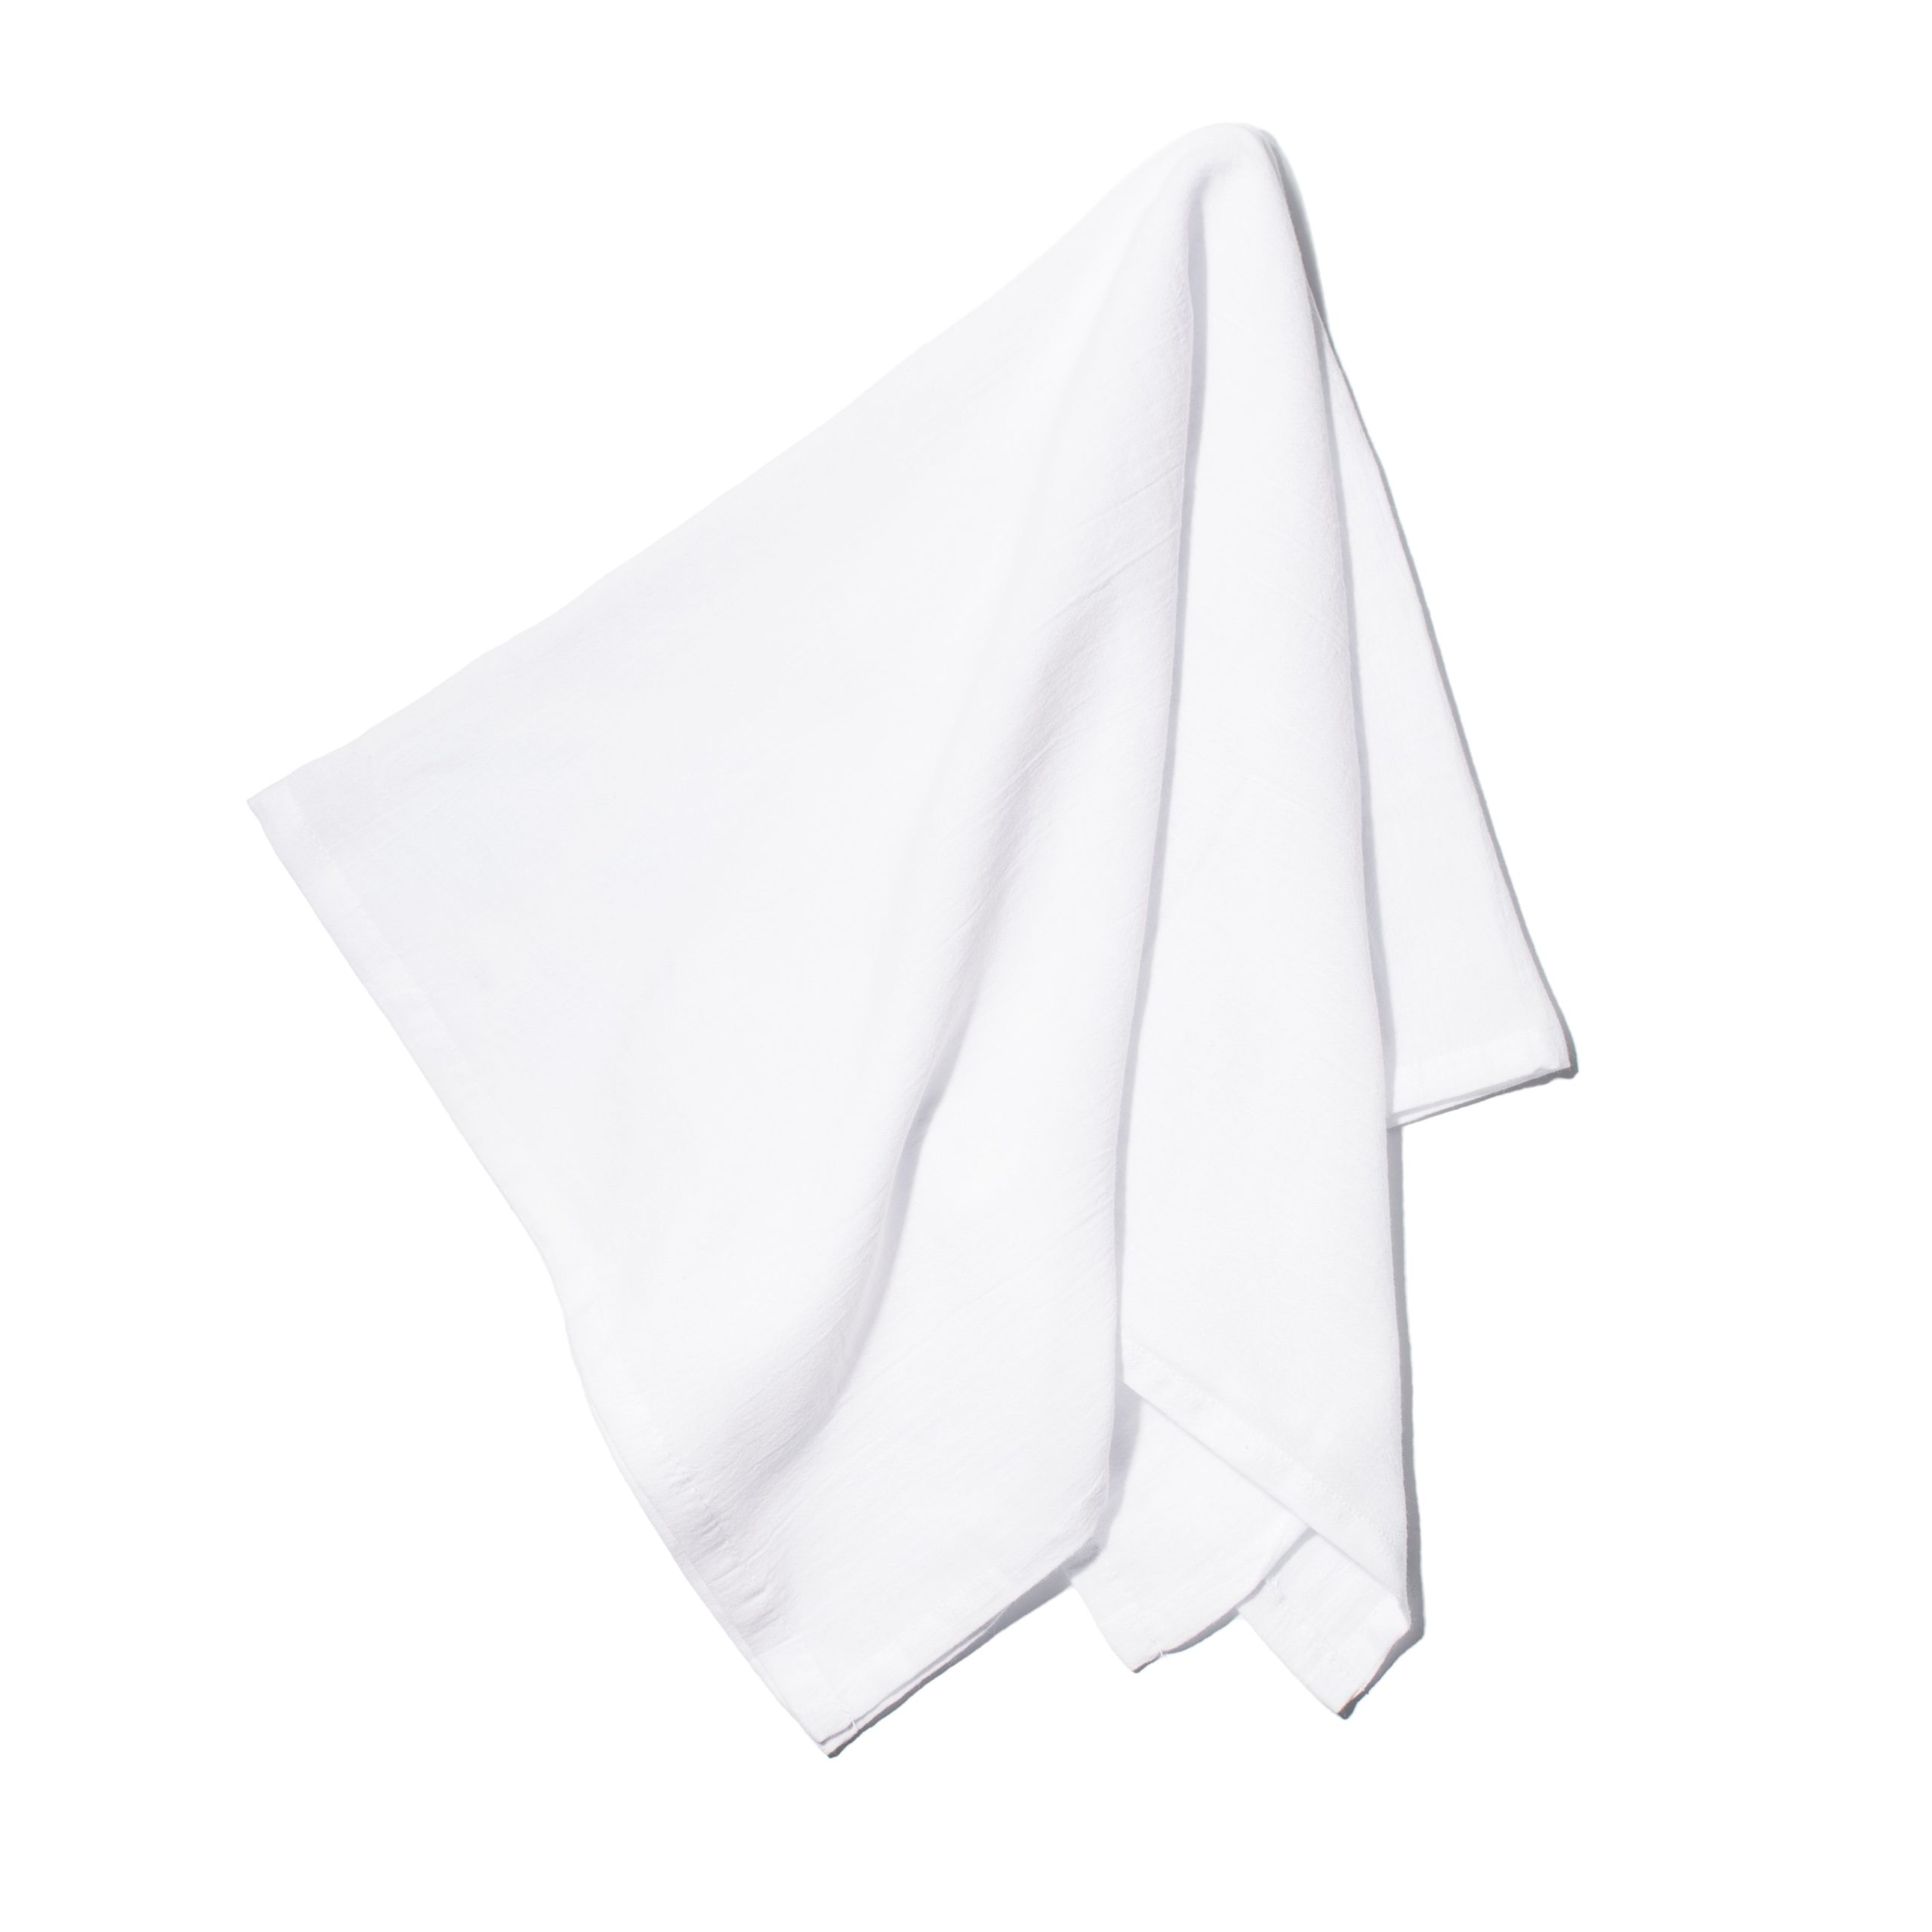 100% Cotton Flour Sack Towels, Made in the USA